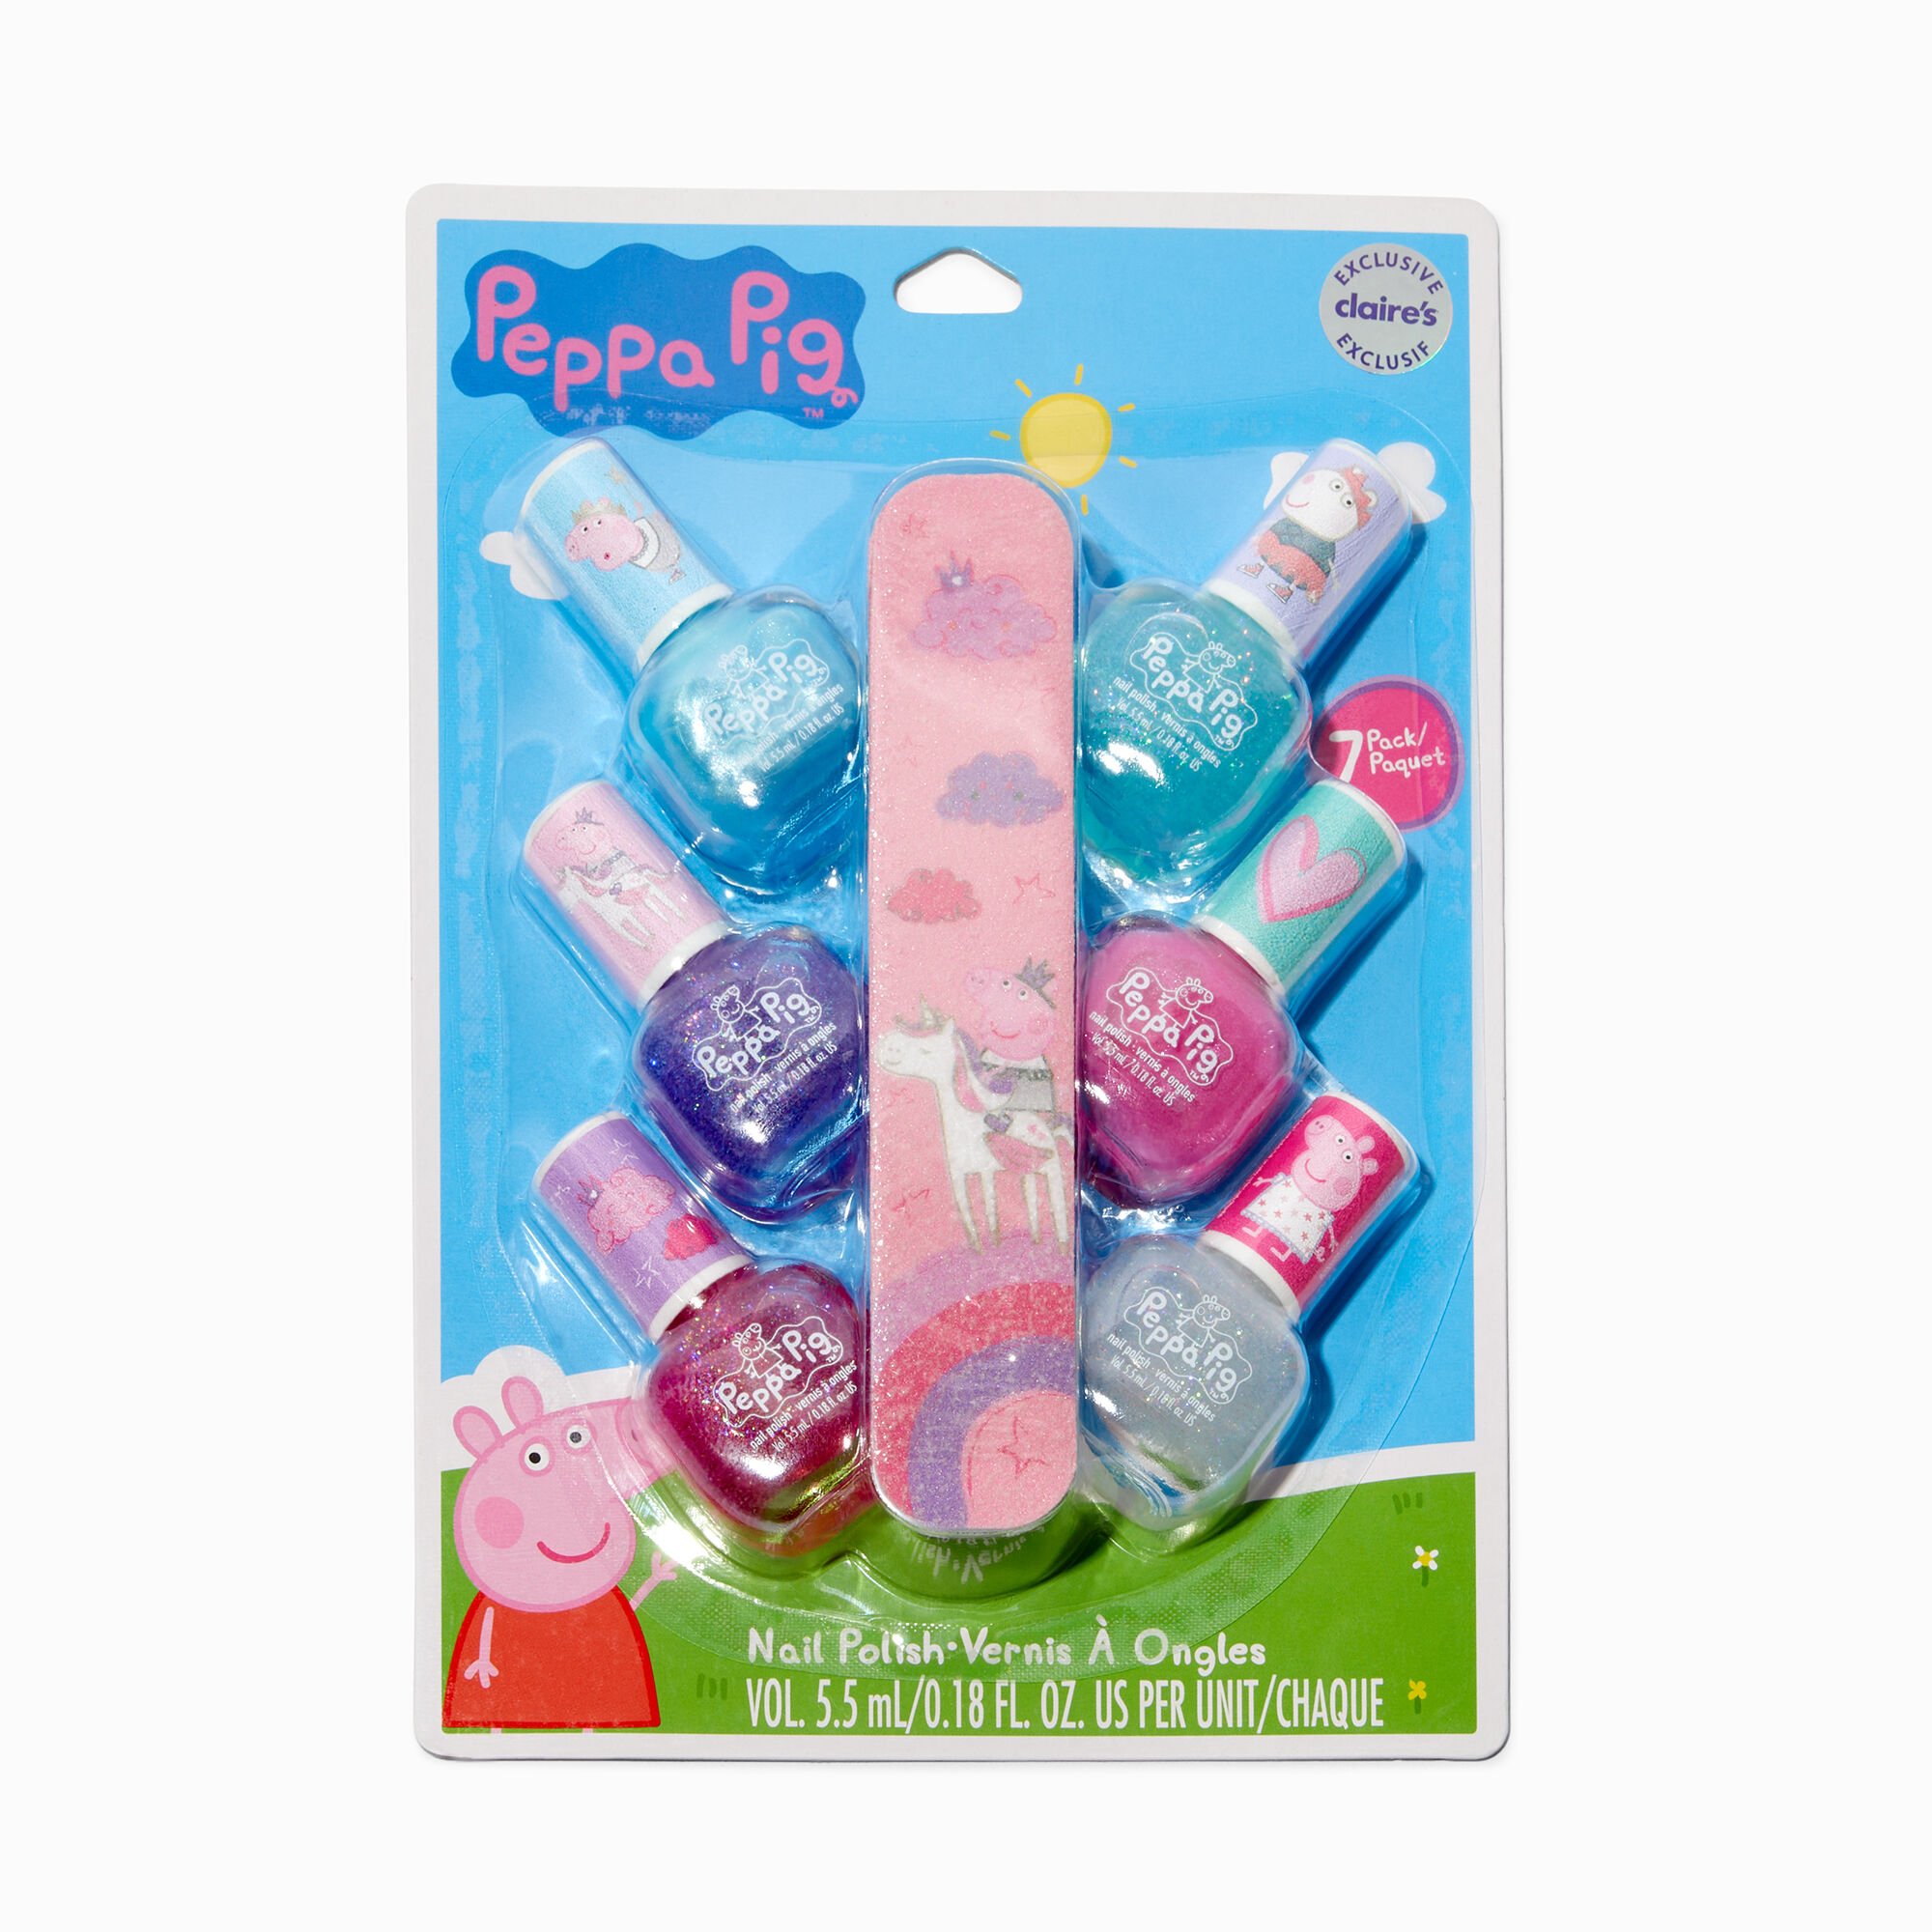 View Peppa Pig Claires Exclusive Nail Polish Set 7 Pack Rainbow information